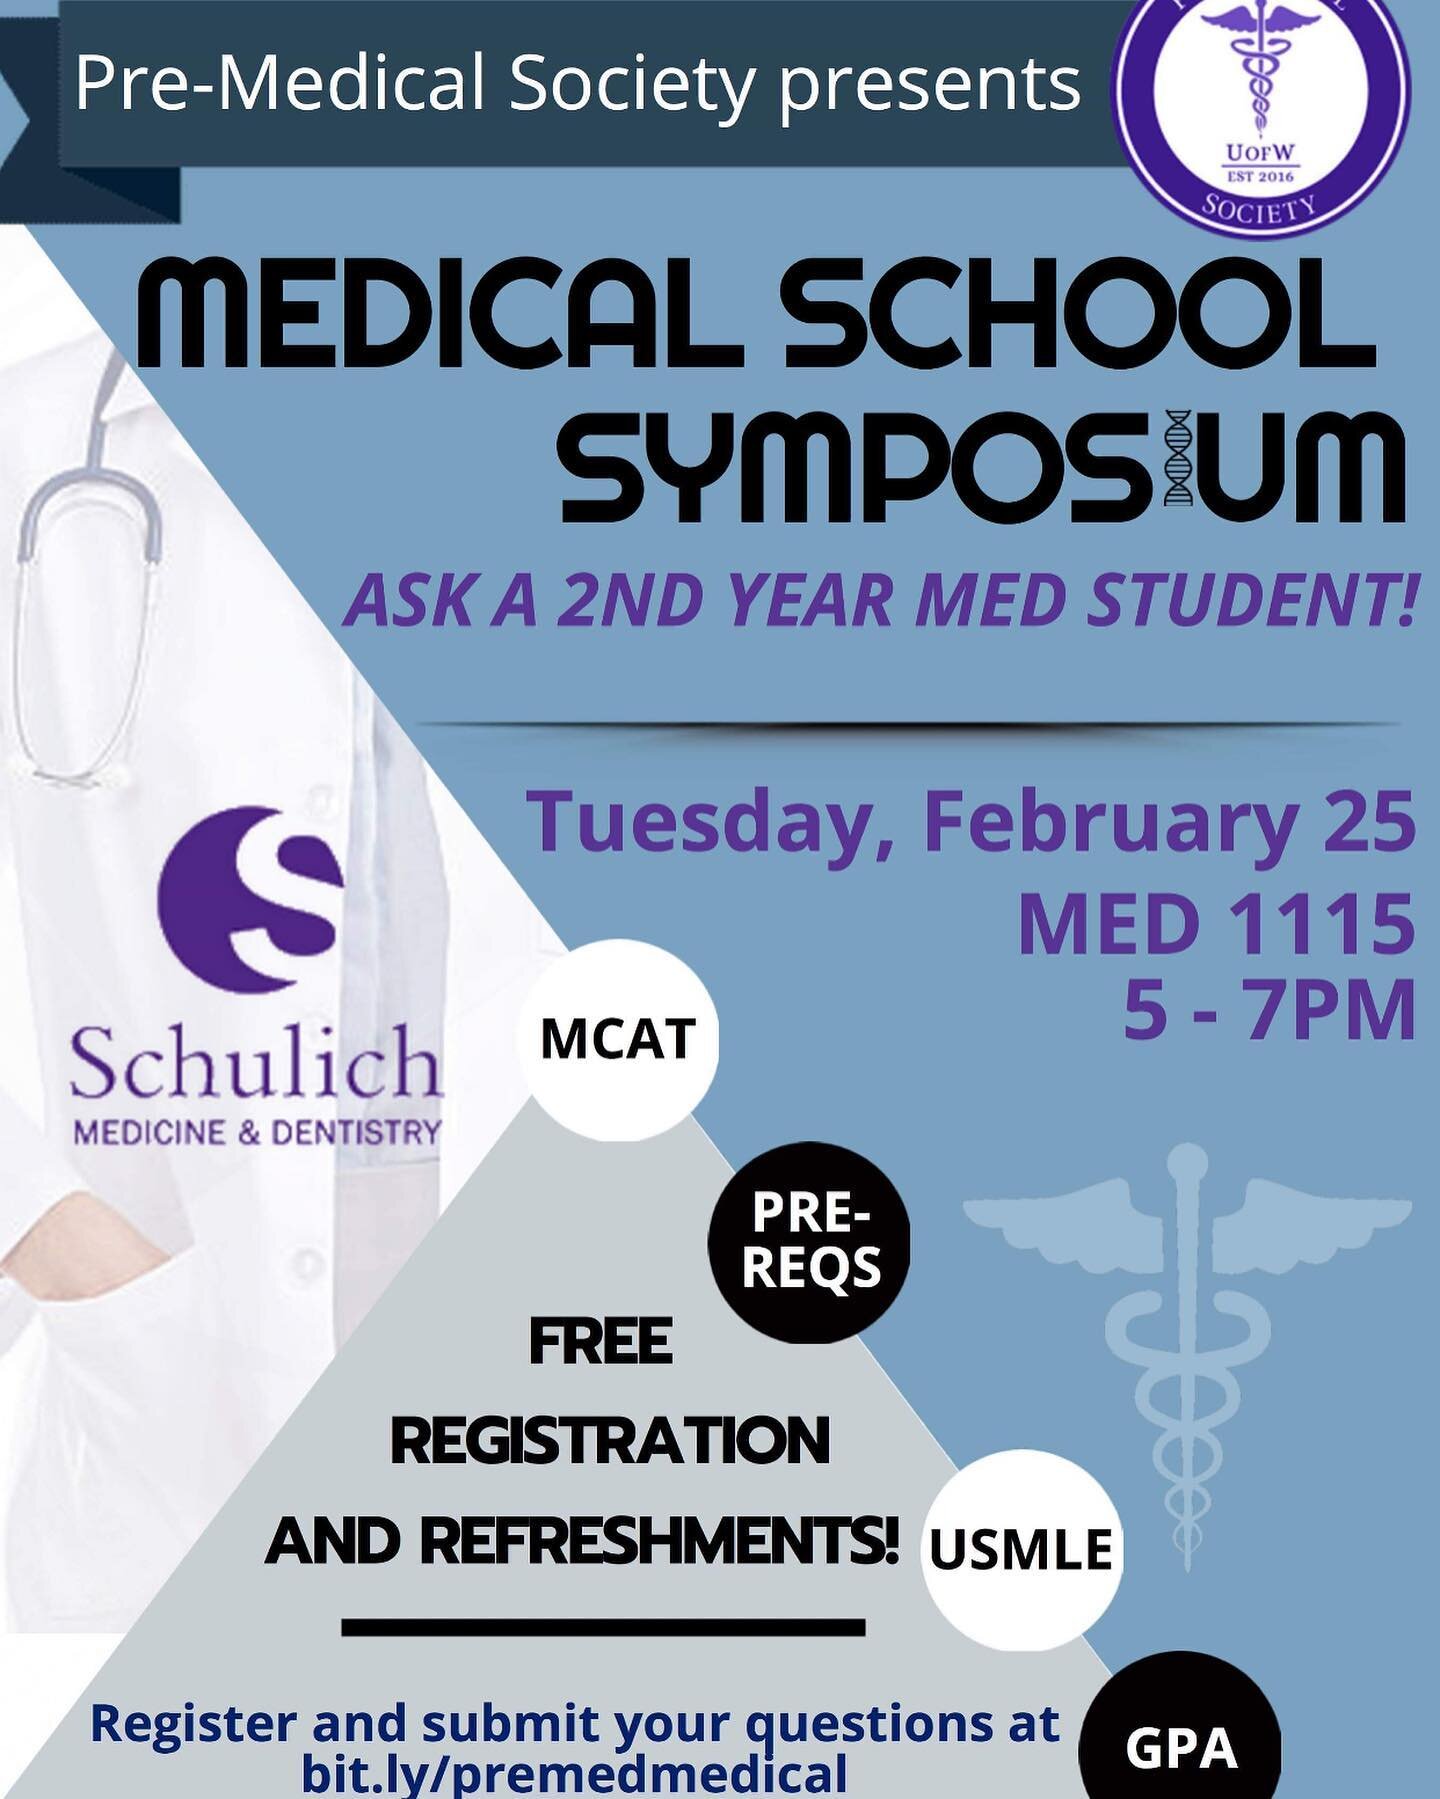 MCATS, GPA, and med school applications can all lead to many questions about how to get into med school. This symposium is the perfect opportunity to answer any questions you have from med students themselves. Even if you are unsure if med school is 